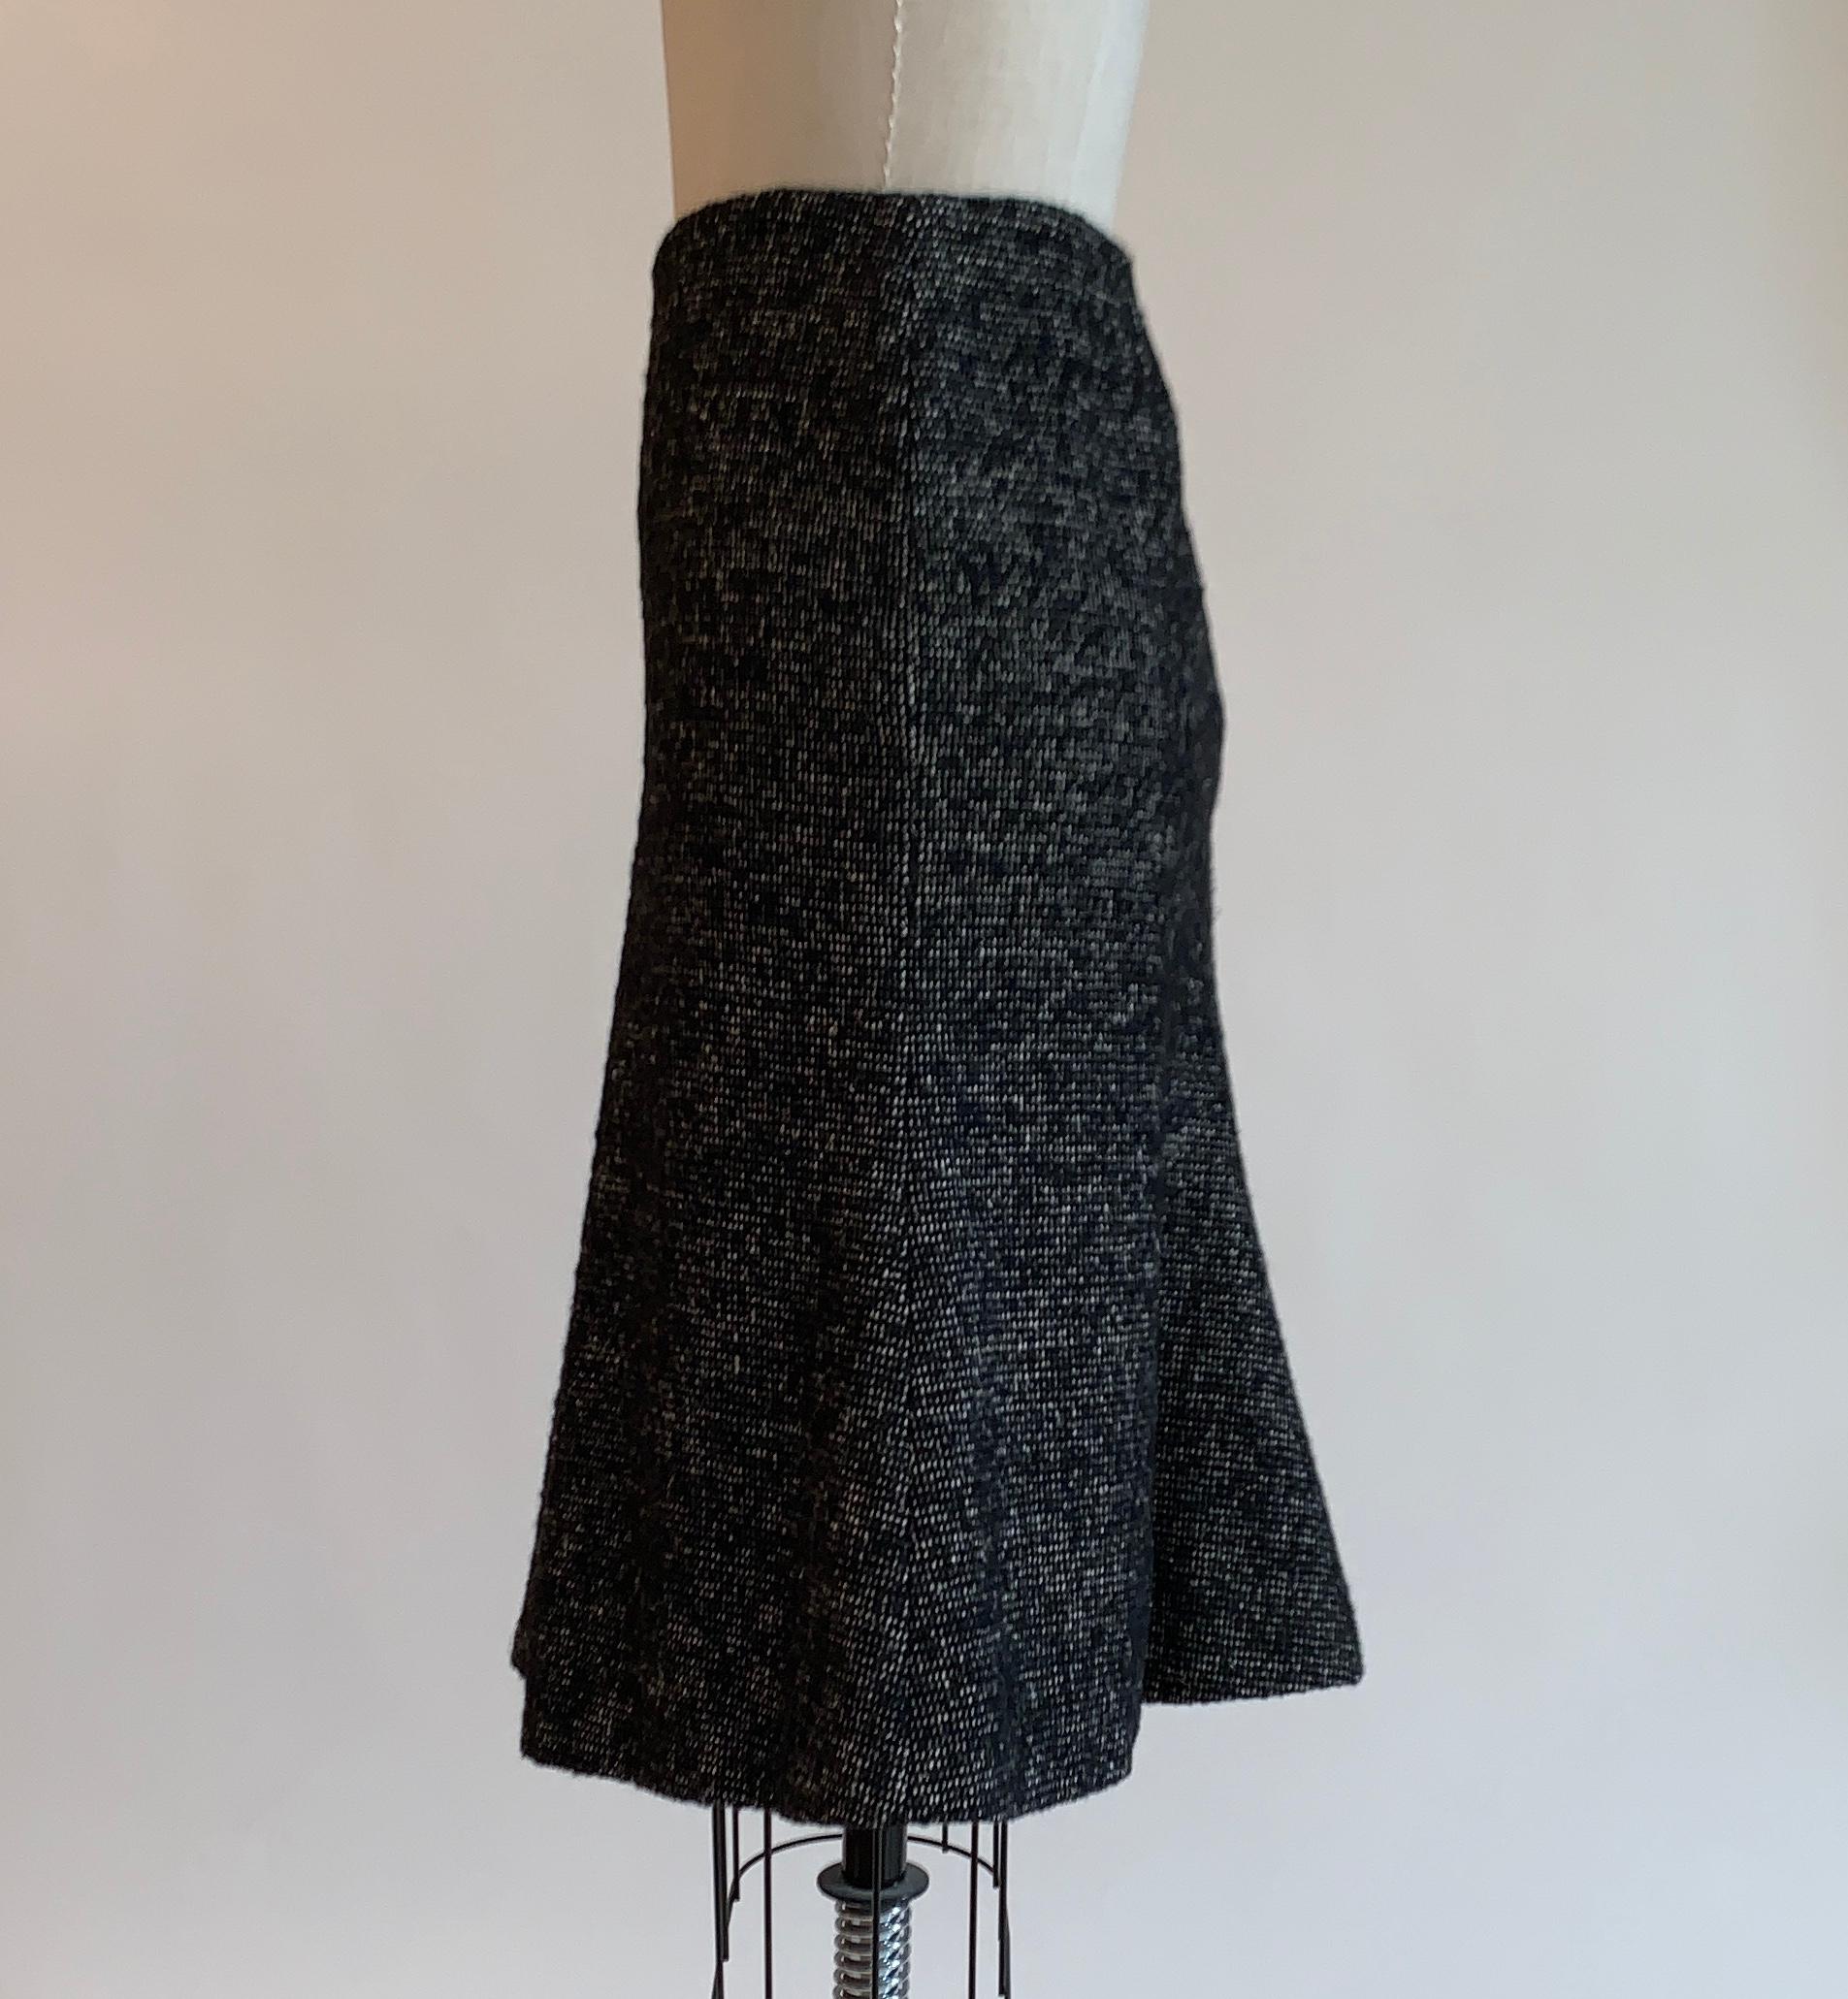 Alexander McQueen 2007 Black White and Grey Flared Wool Skirt 